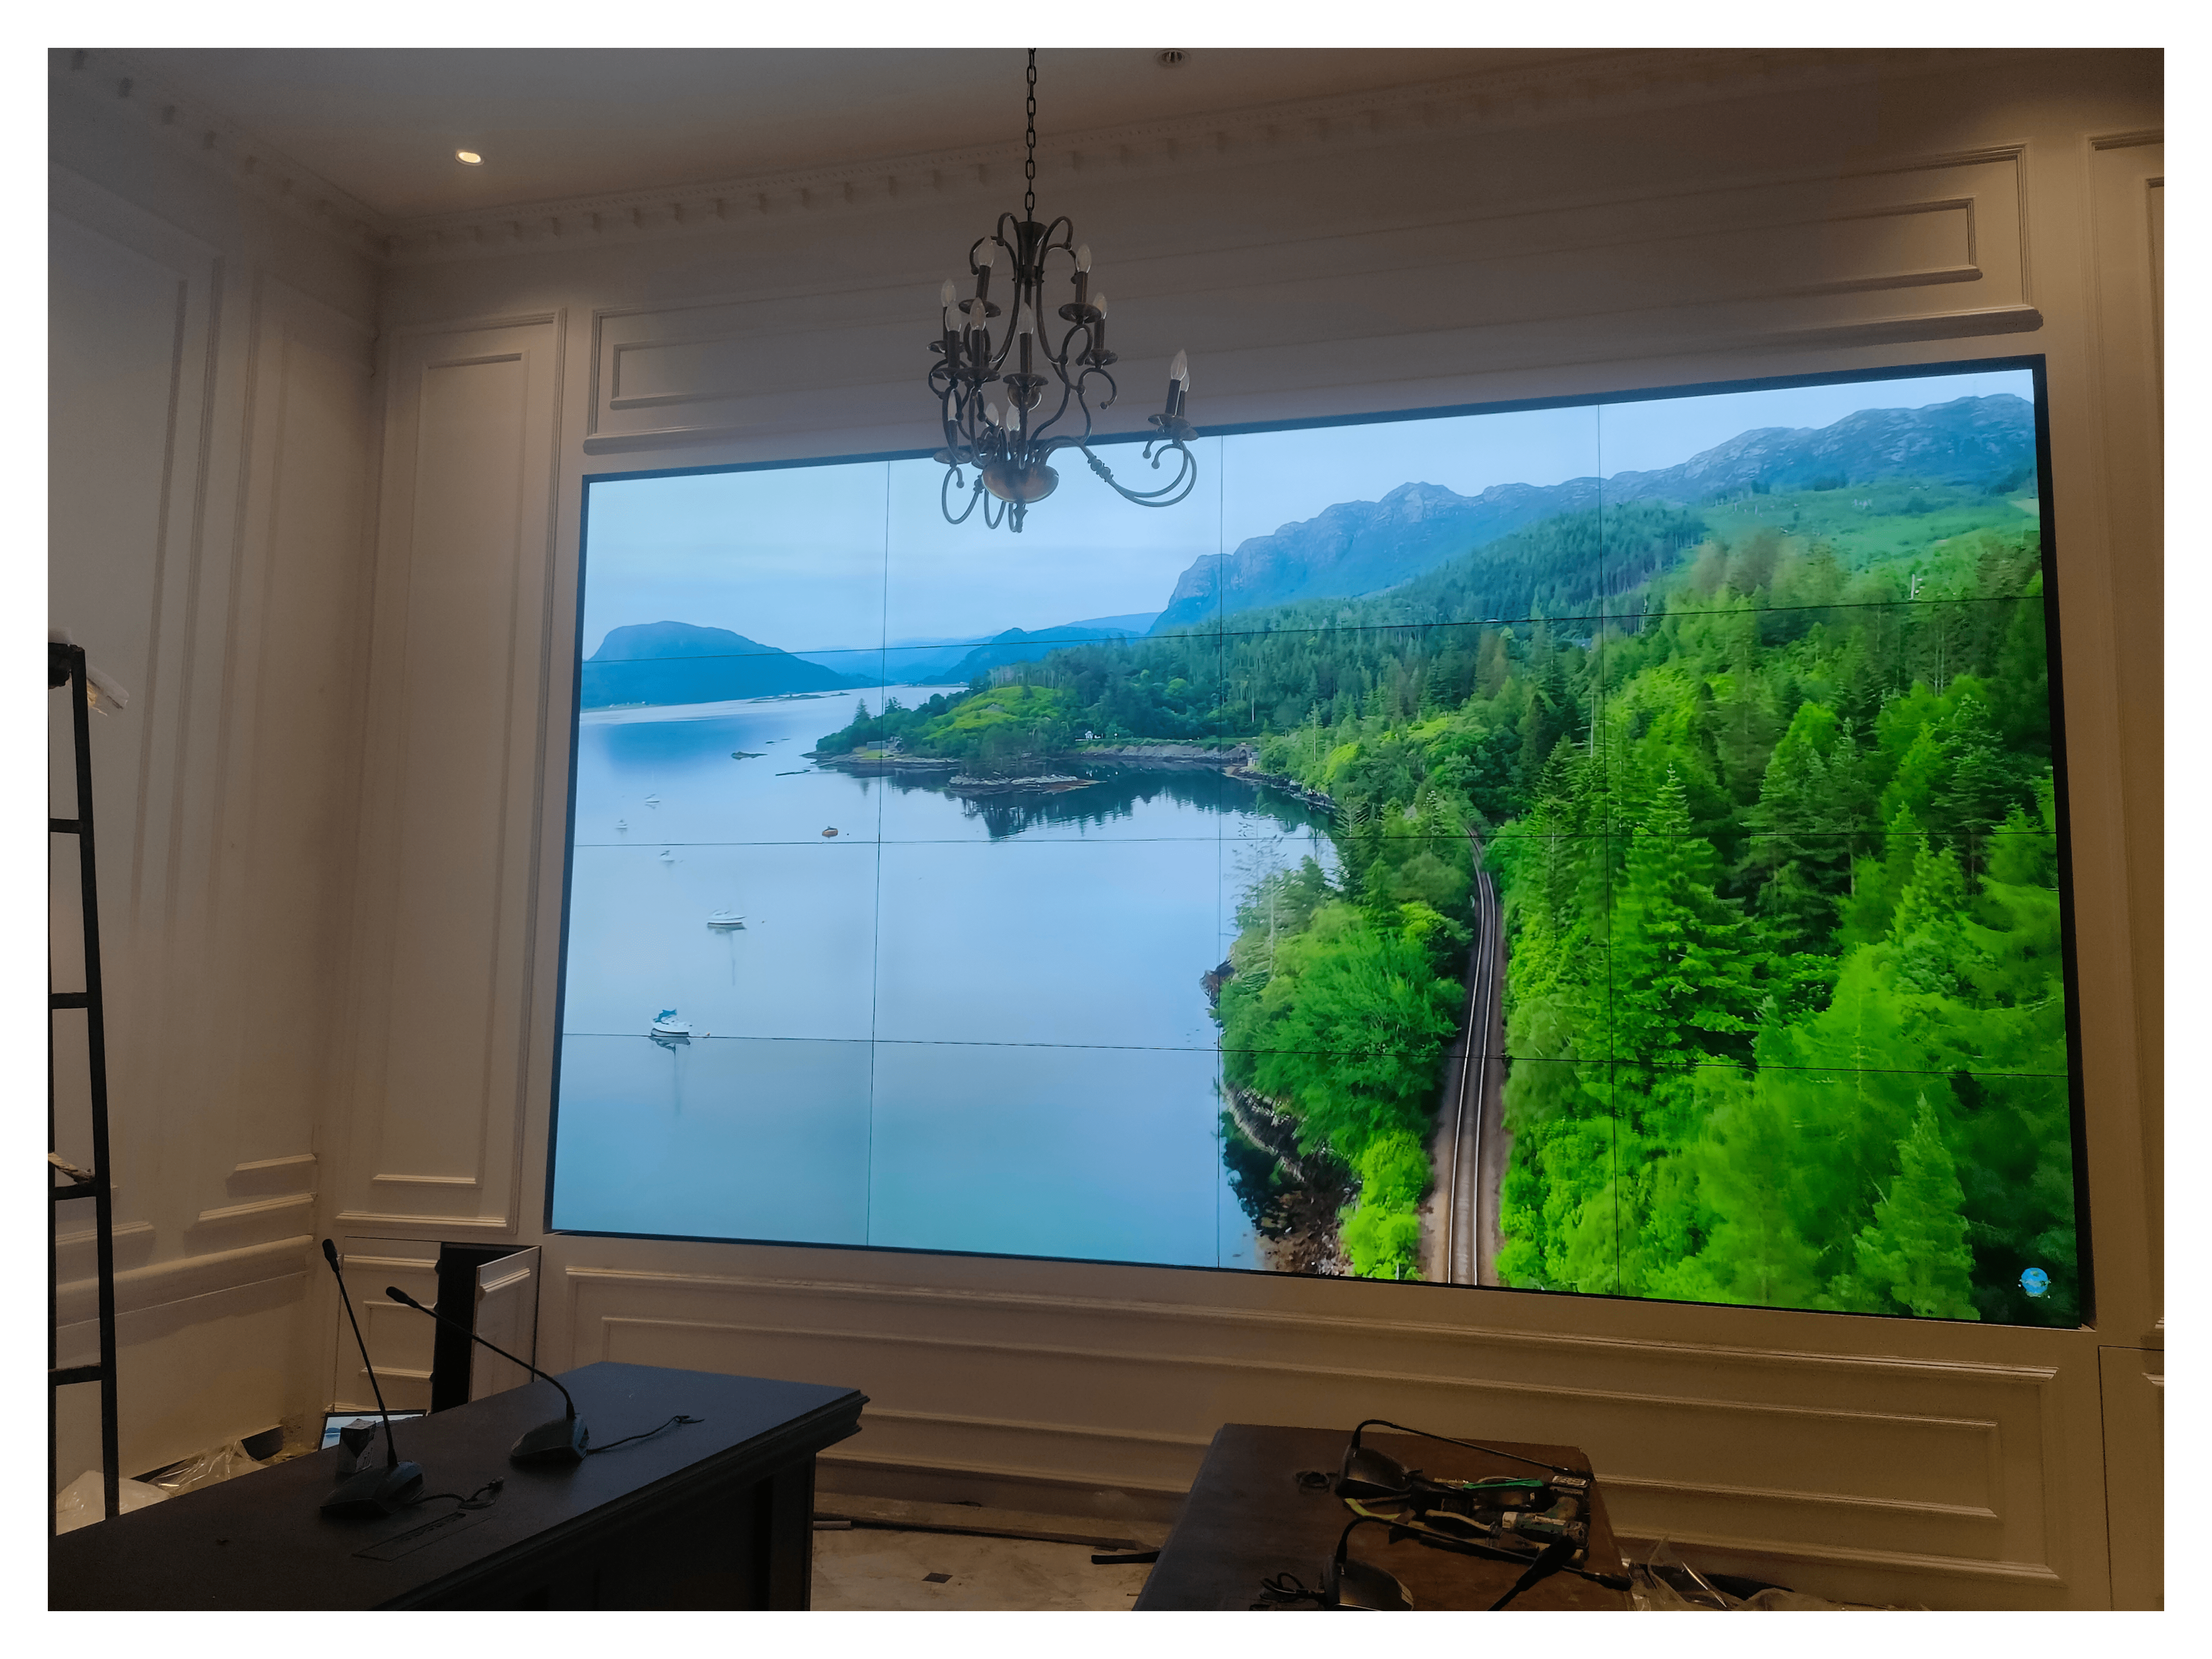 A 3x2 tiled LCD Video Wall display showing various images of beaches and greenery. Complete setup by EziSol